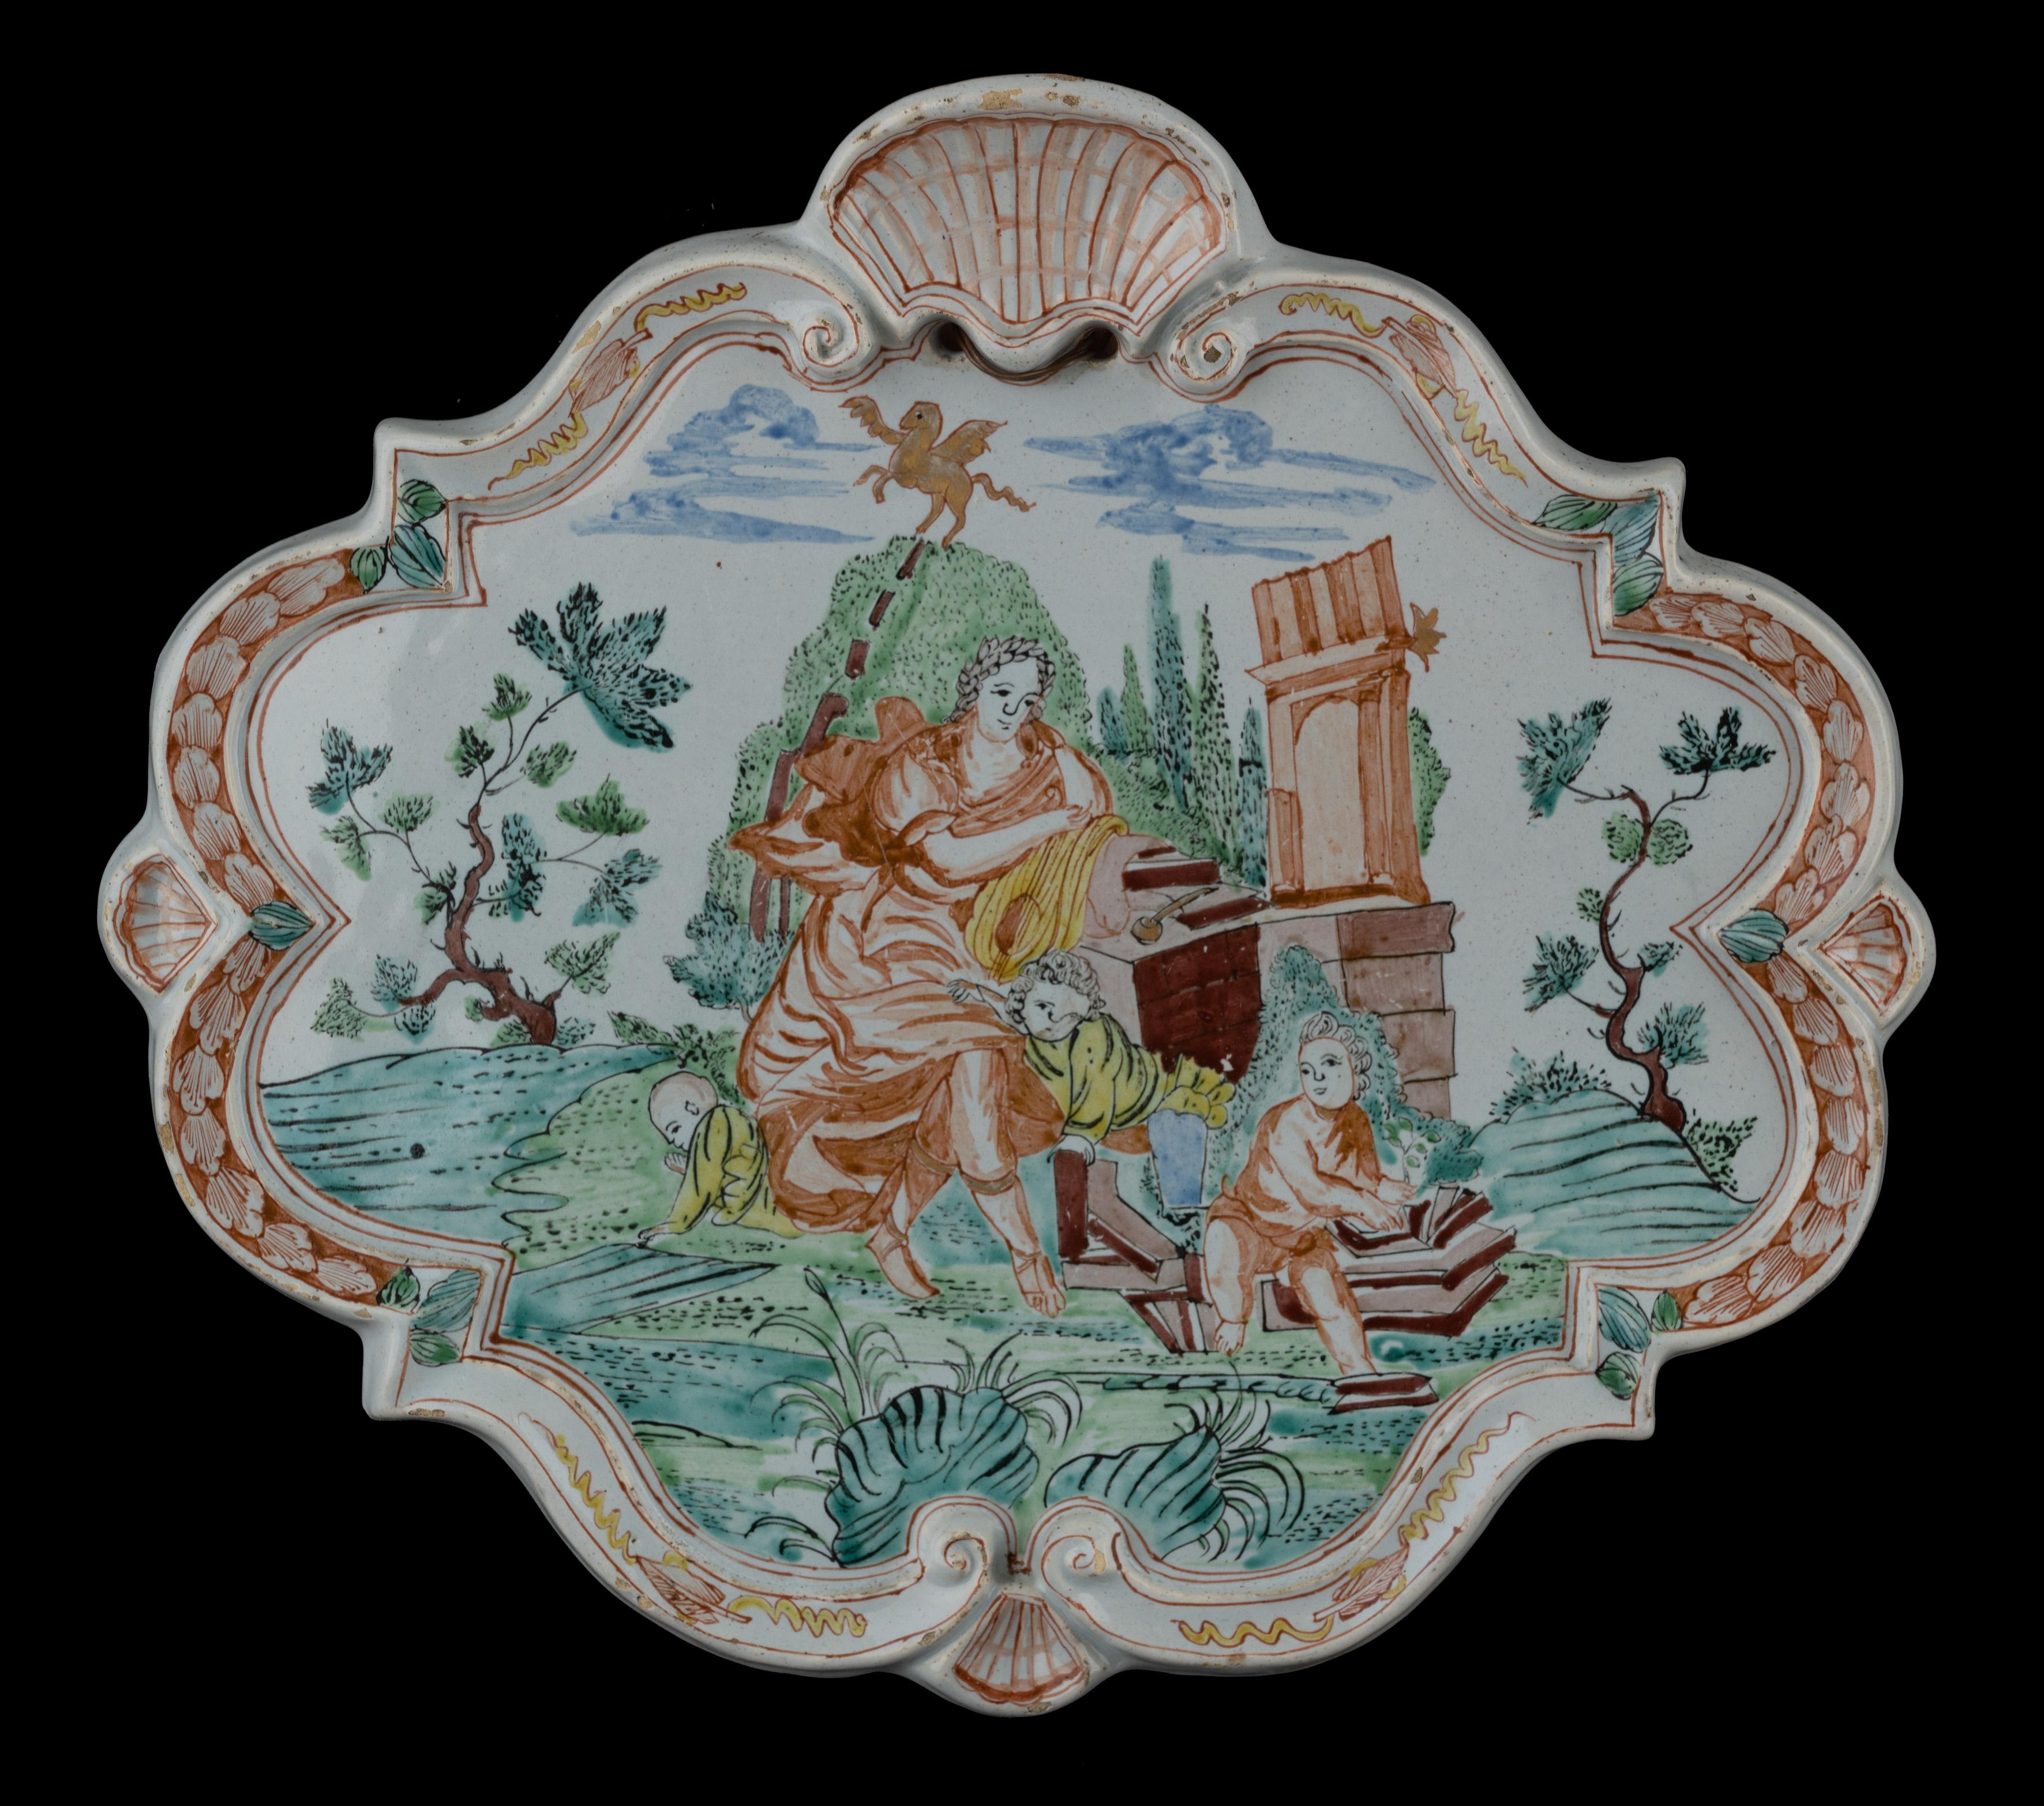 Polychrome plaque with an allegorical depiction. Delft, 1730-1750 

The lozenge-shaped plaque has a raised, accolade-shaped rim interrupted at the top by a large shell and at the bottom by a smaller shell. A shell is also modelled on both sides. The